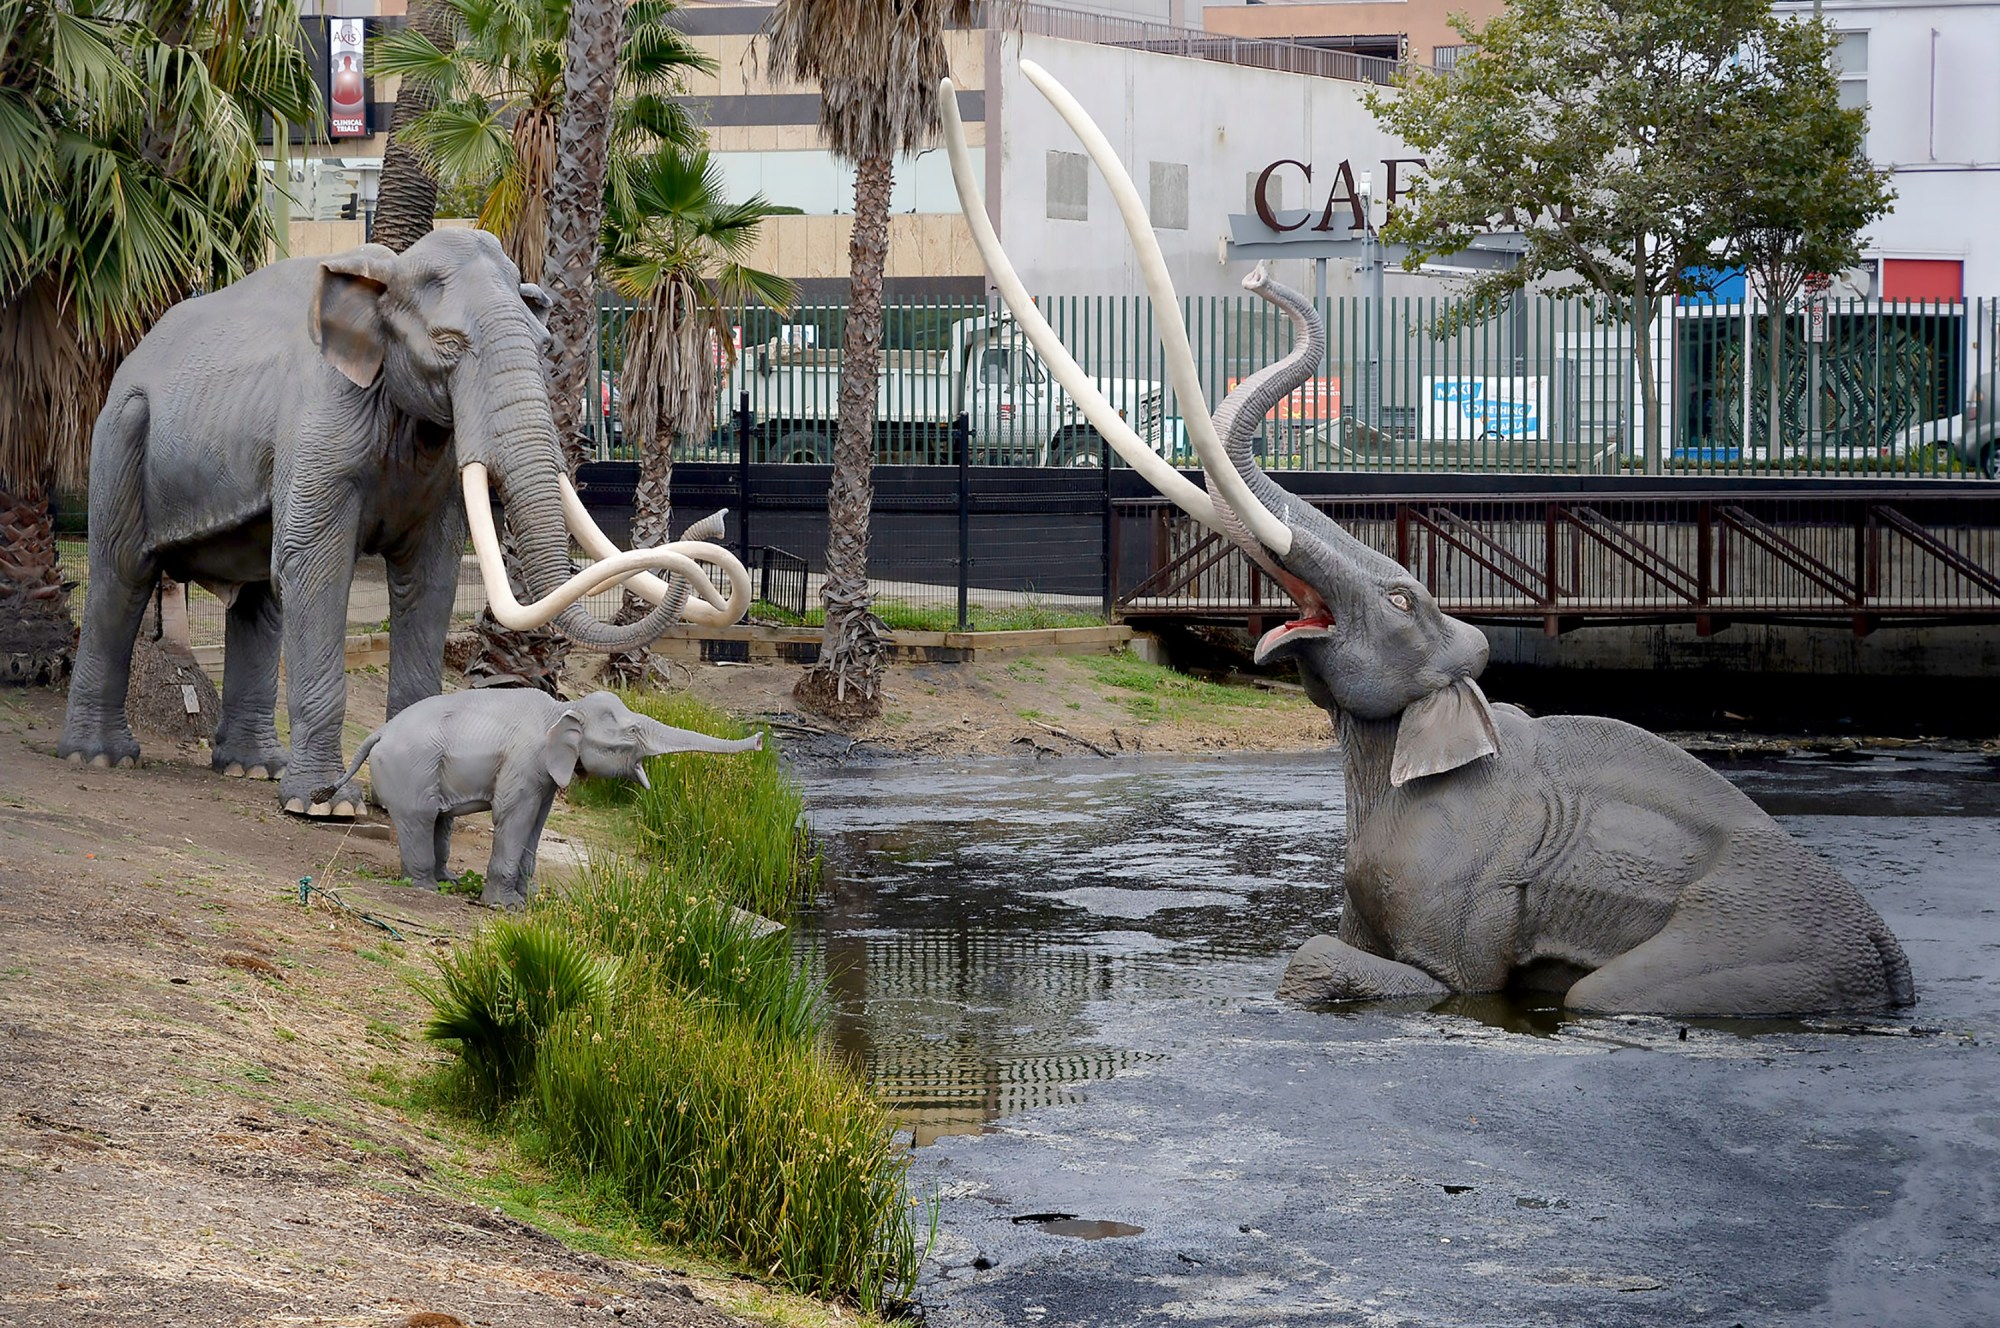 File photo of the Columbian Mammoths, visible in the pond in the La Brea Tar Pits in Los Angeles. (Photo by John McCoy, Los Angeles Daily News/SCNG)